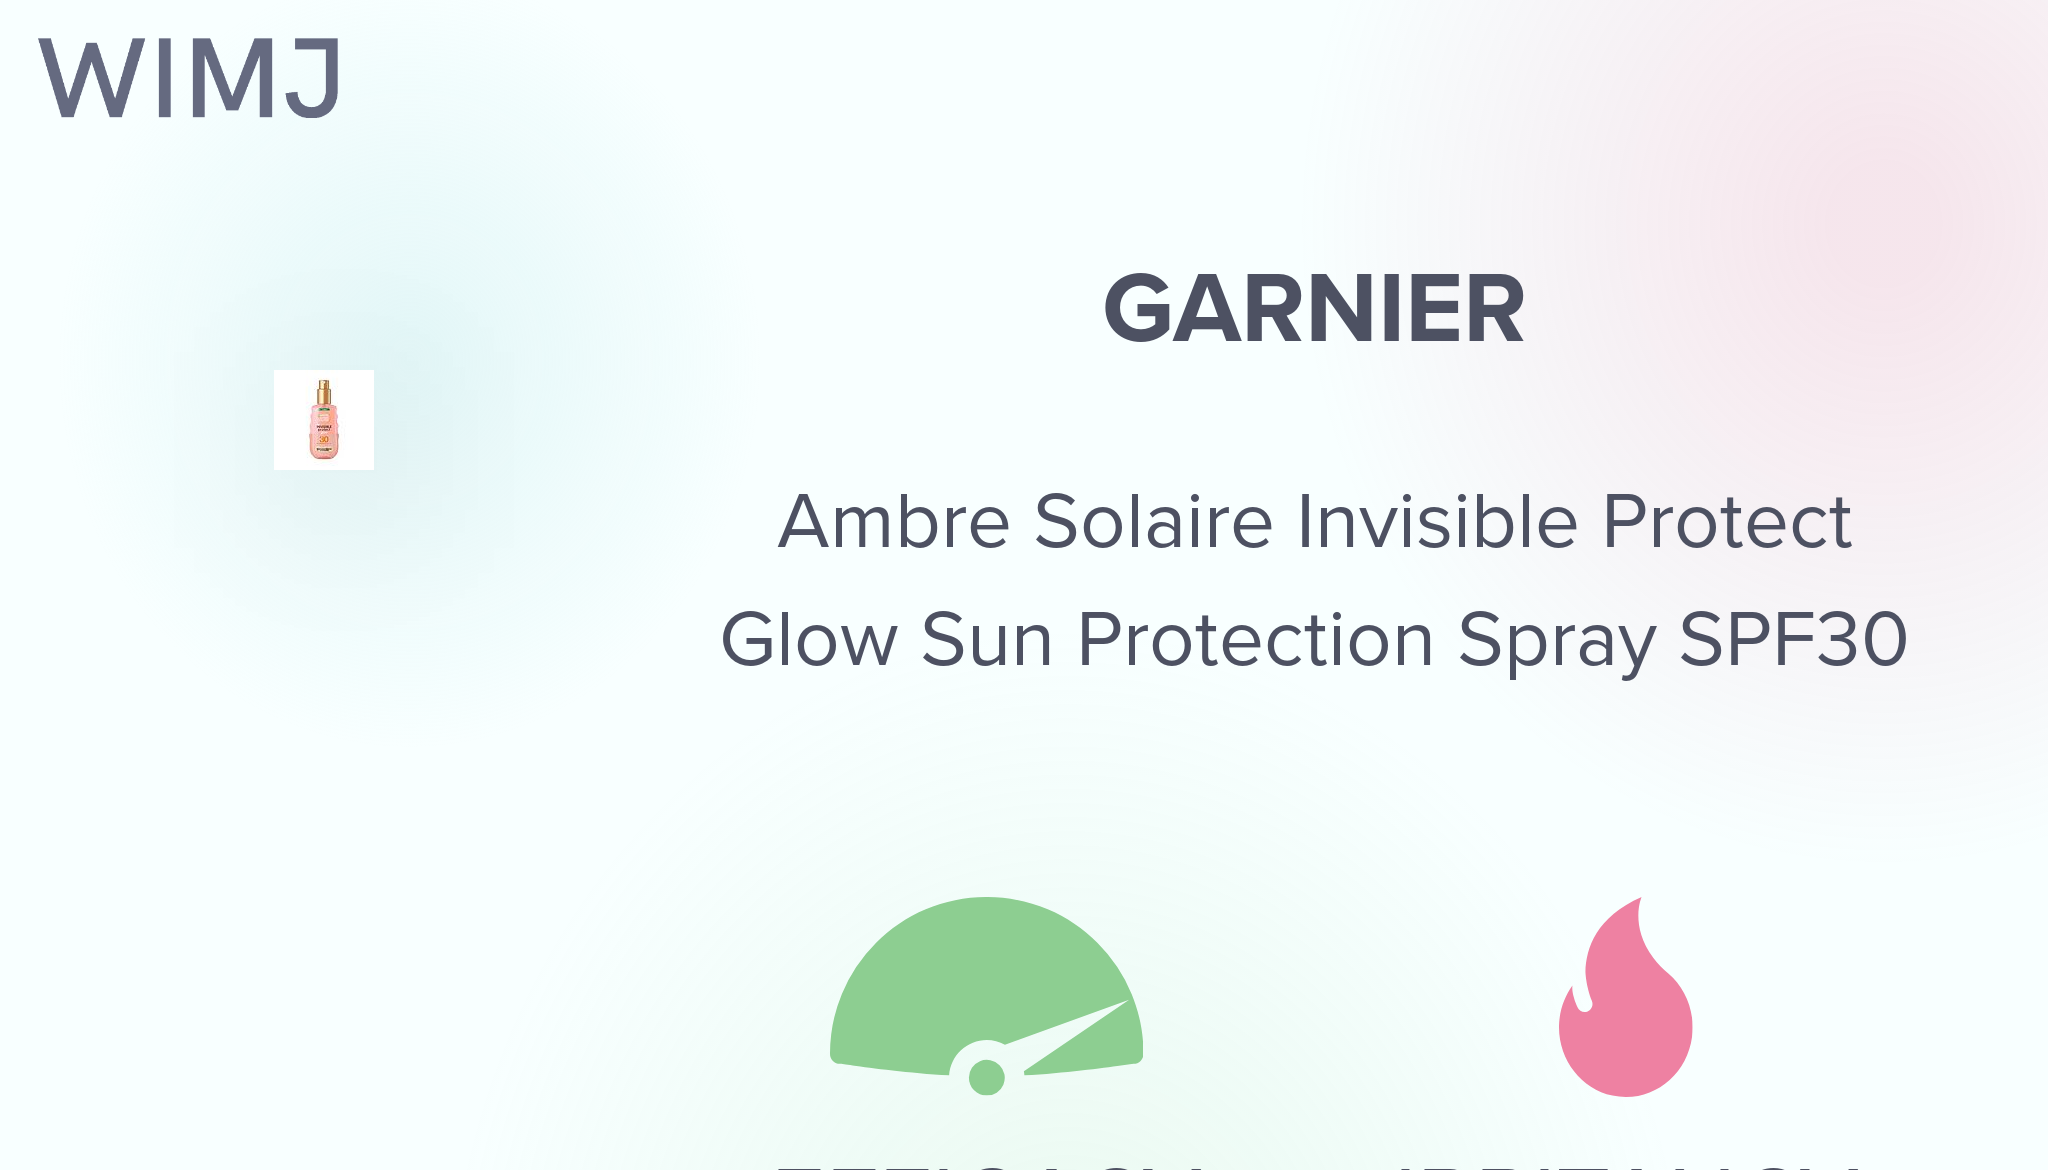 - Ambre Protect Protection Glow Review: SPF30 WIMJ Spray Invisible Solaire - Garnier Sun